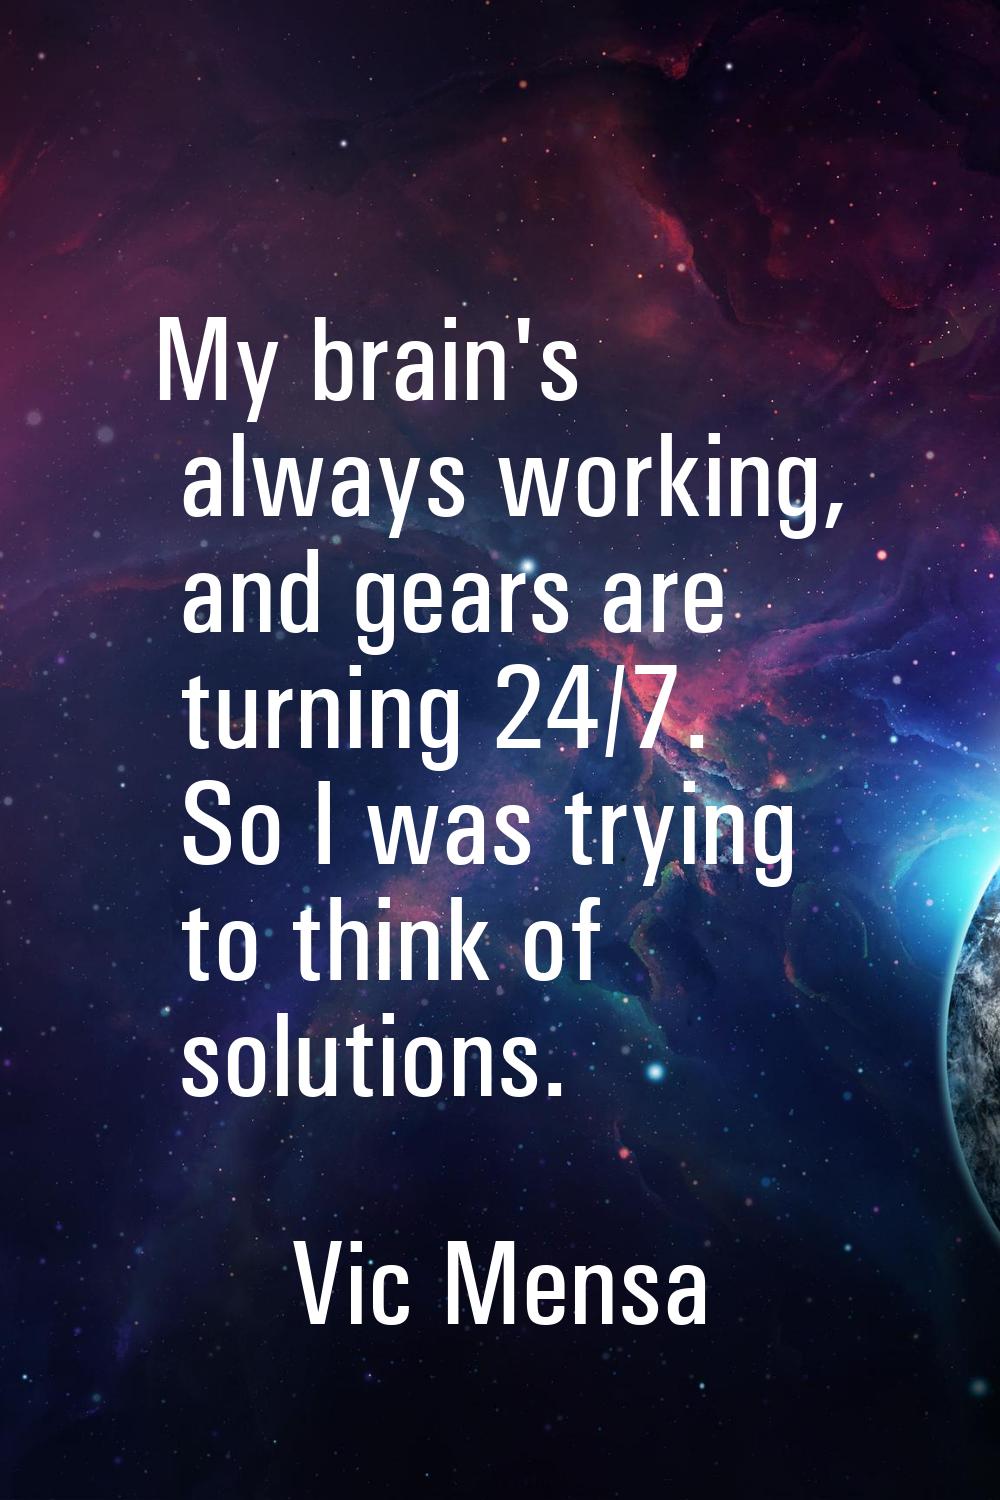 My brain's always working, and gears are turning 24/7. So I was trying to think of solutions.